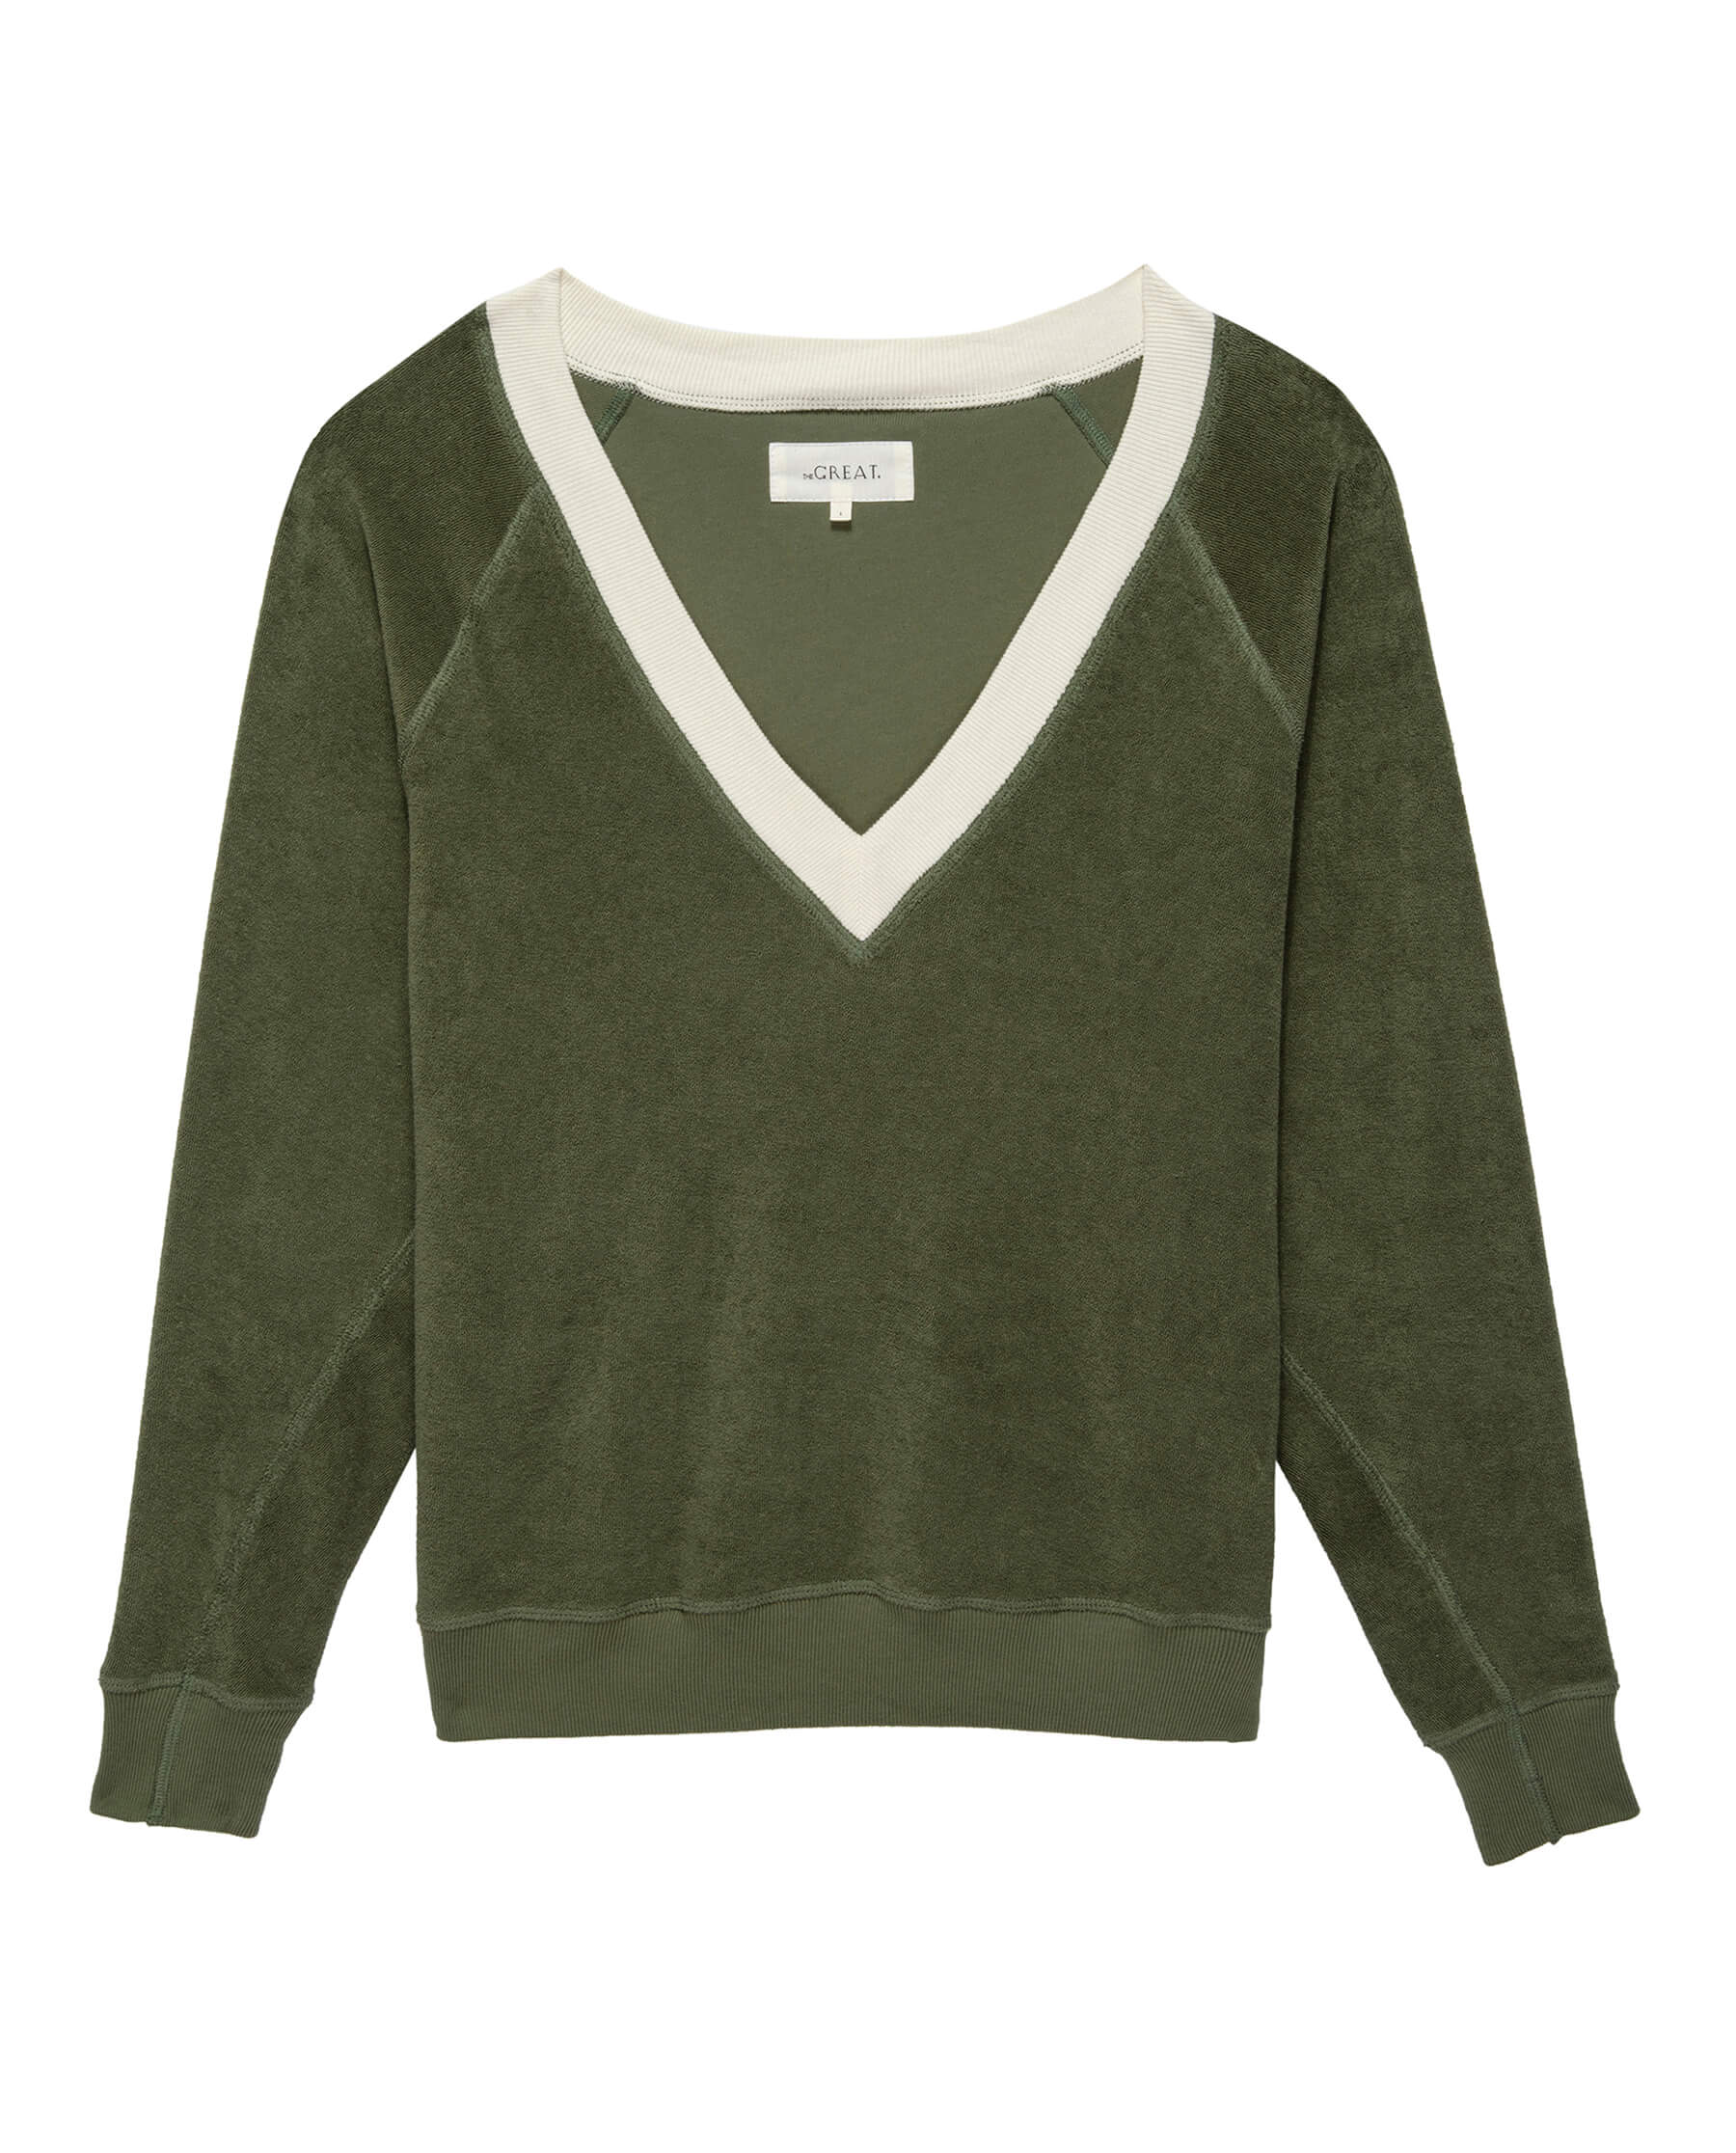 The Microterry V-Neck Sweatshirt. -- Army